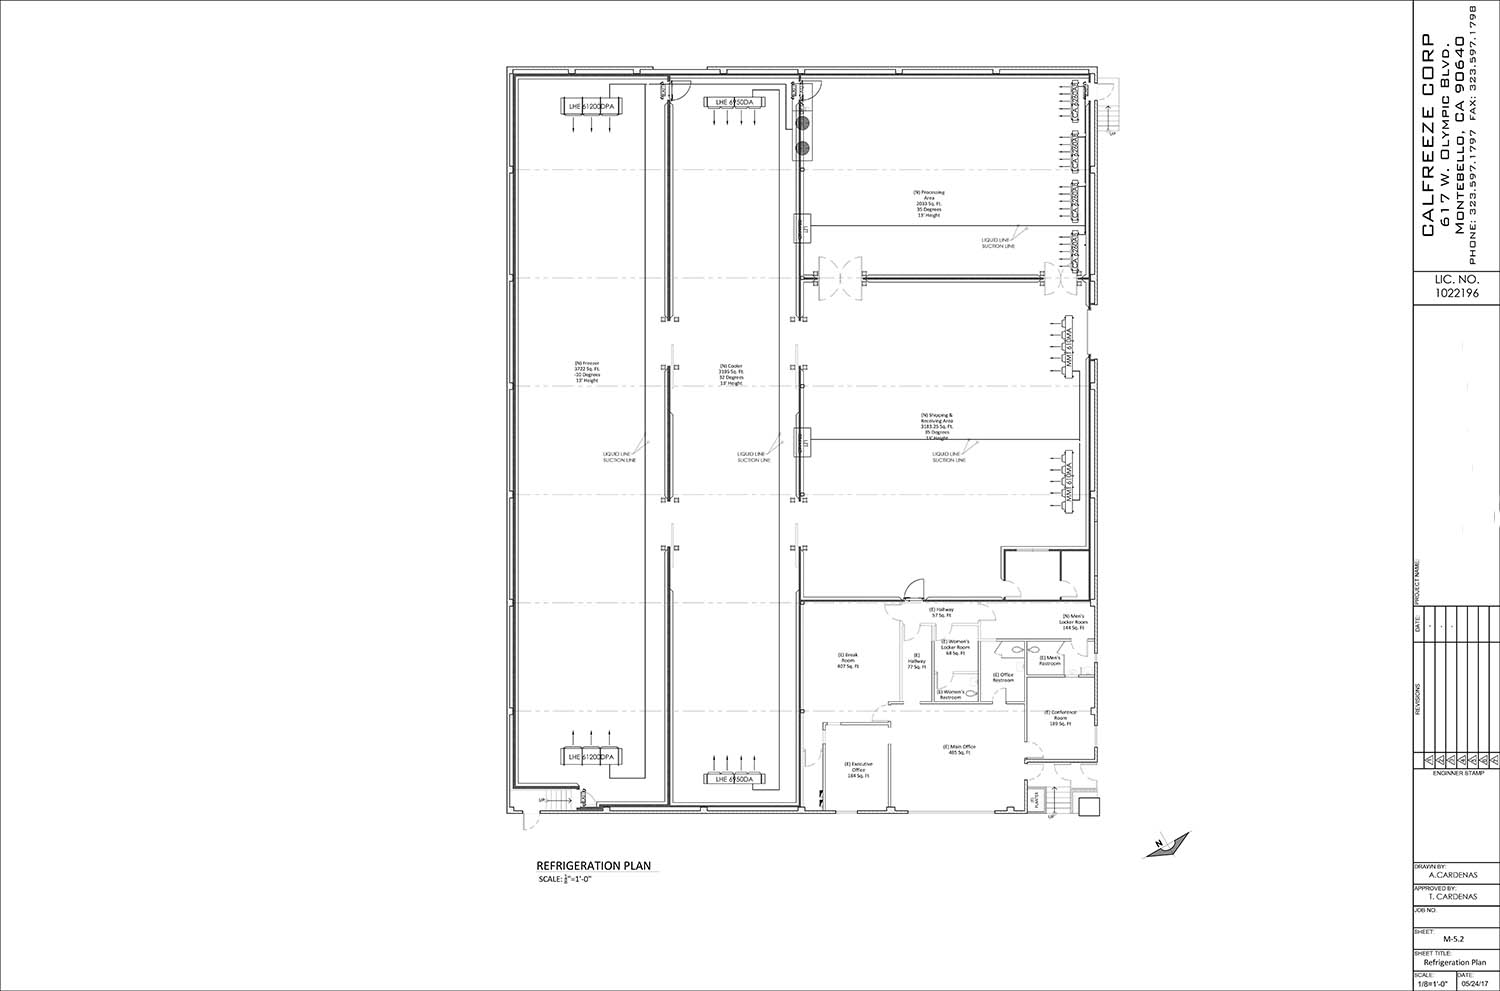 M 5.2_Cold Storage Construction_existing site plan.jpg